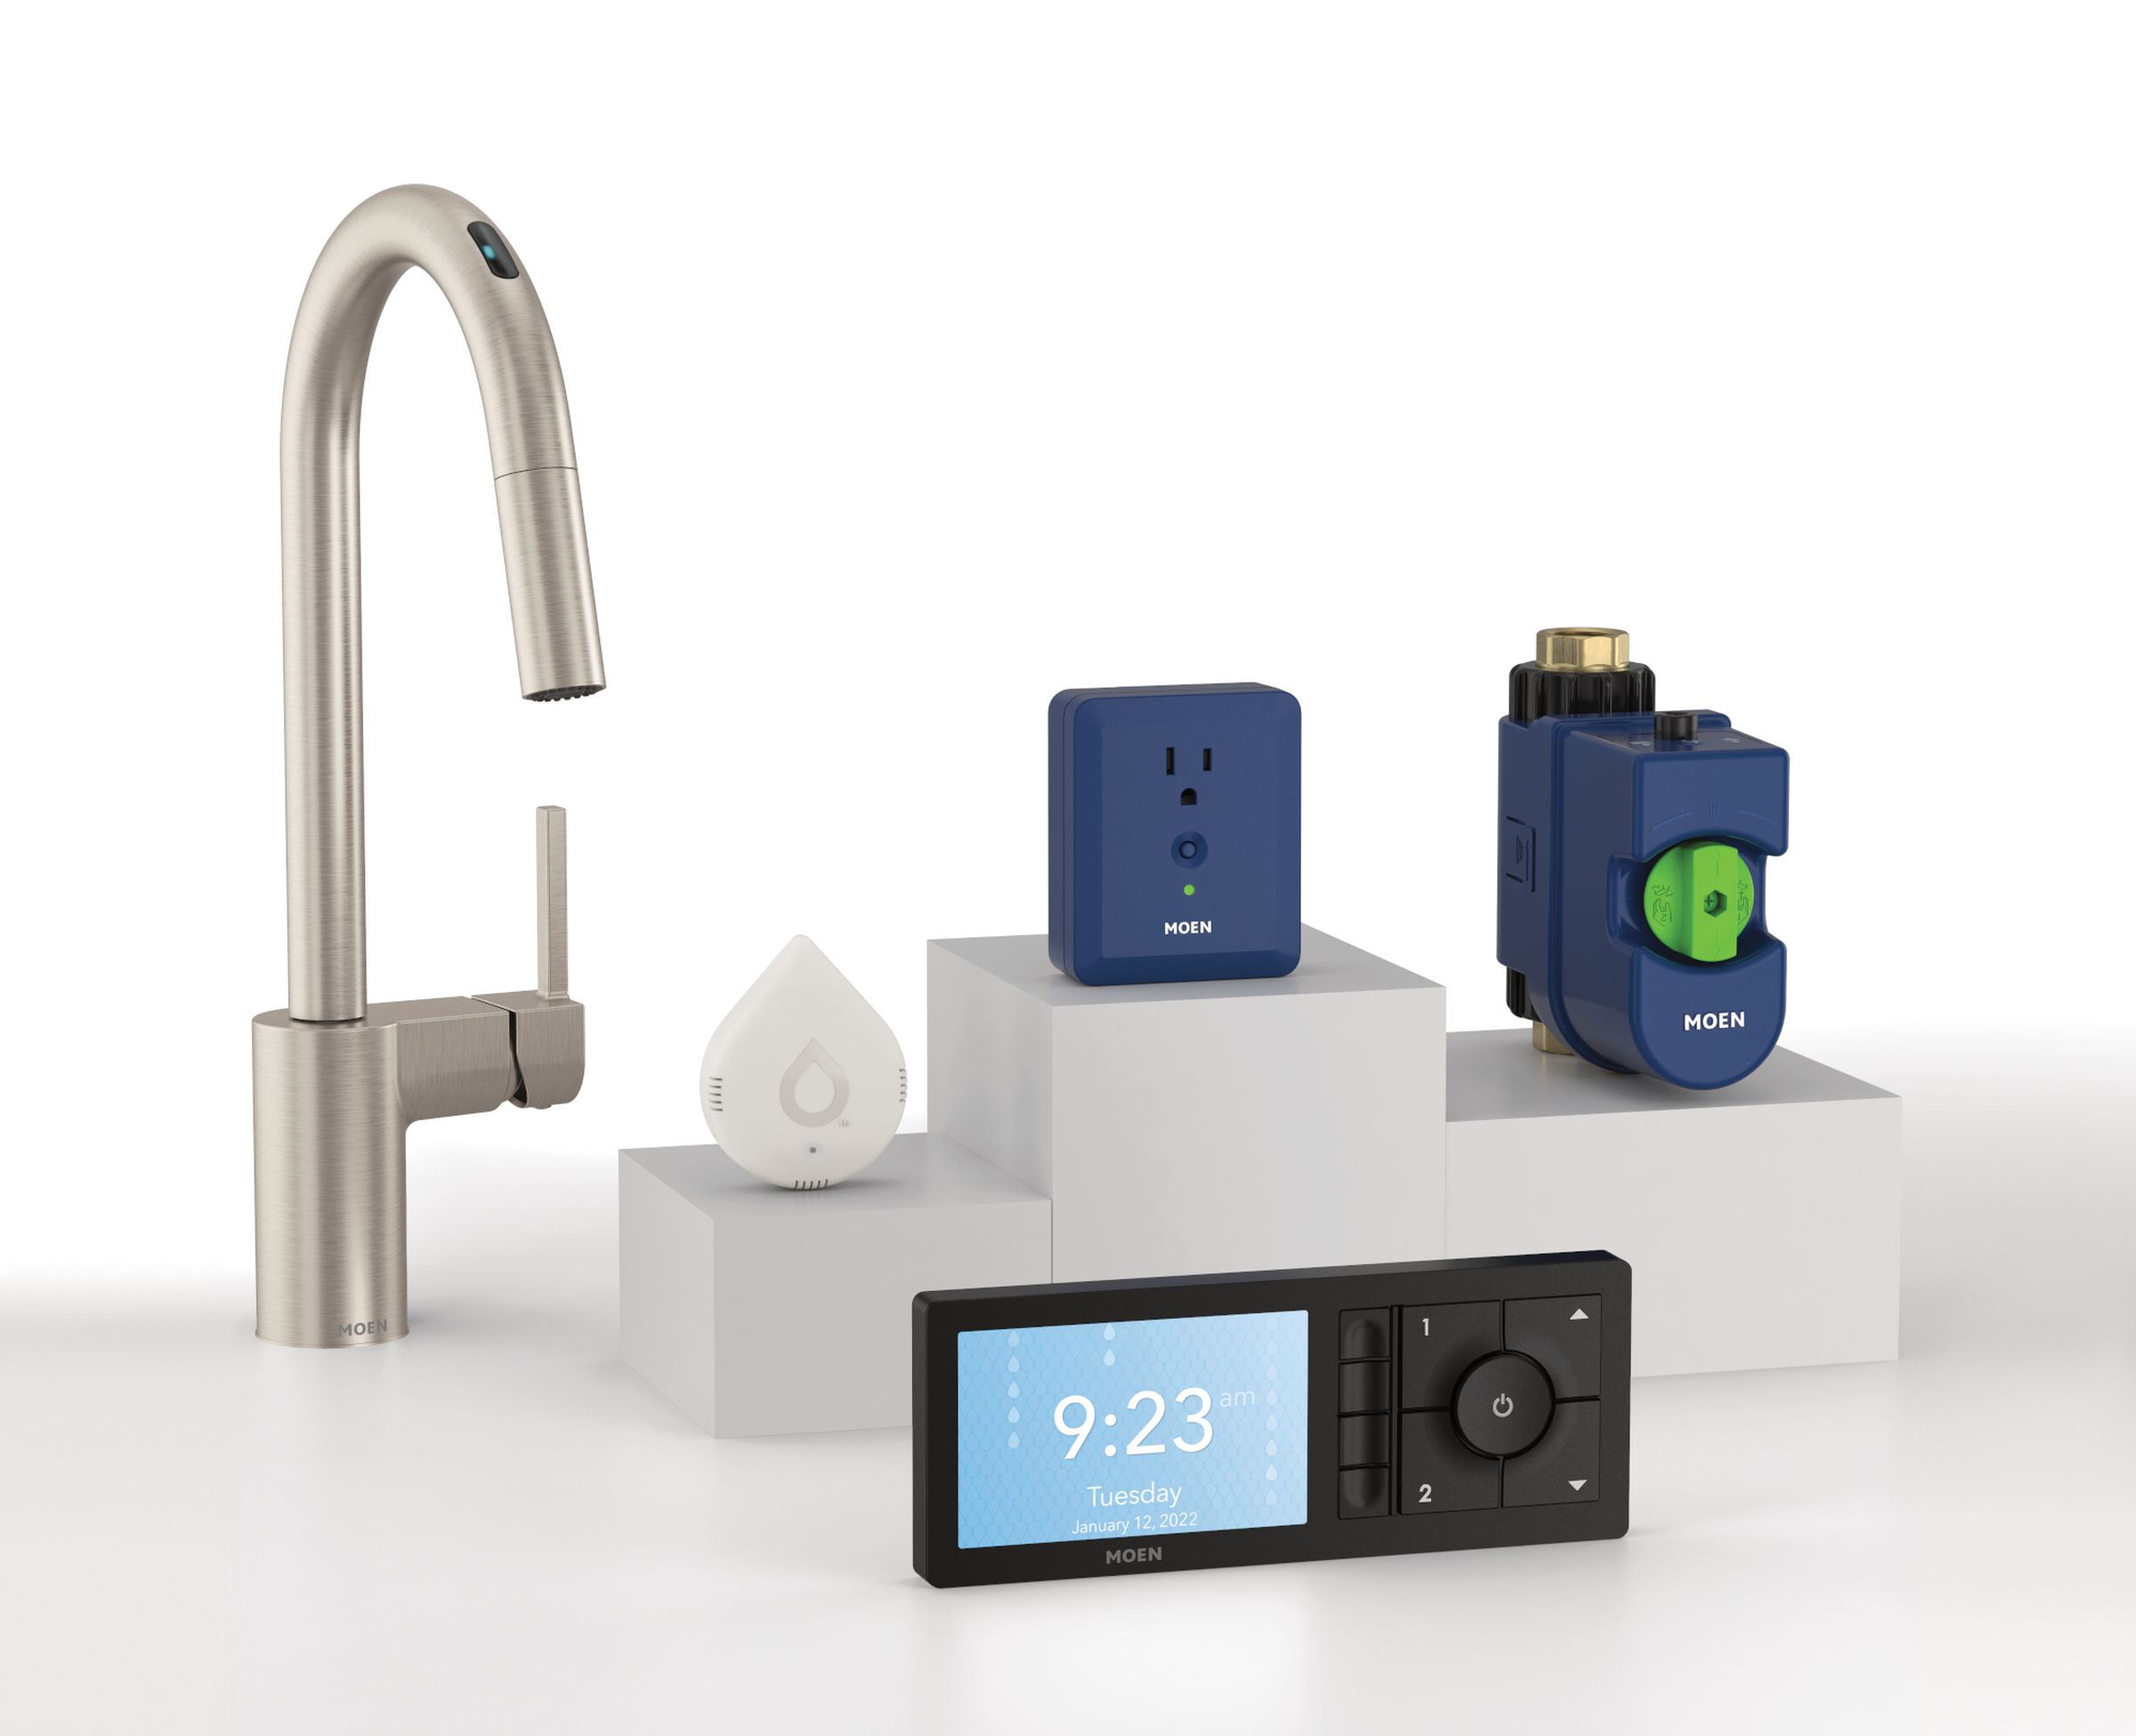 Moen’s smart devices will all work together as part of its Smart Water Network. From left: Moen Smart Faucet, Smart Leak Detector, Smart Sump Pump Monitor, Flo Smart Water Monitor and Shutoff, Smart Shower controller. 